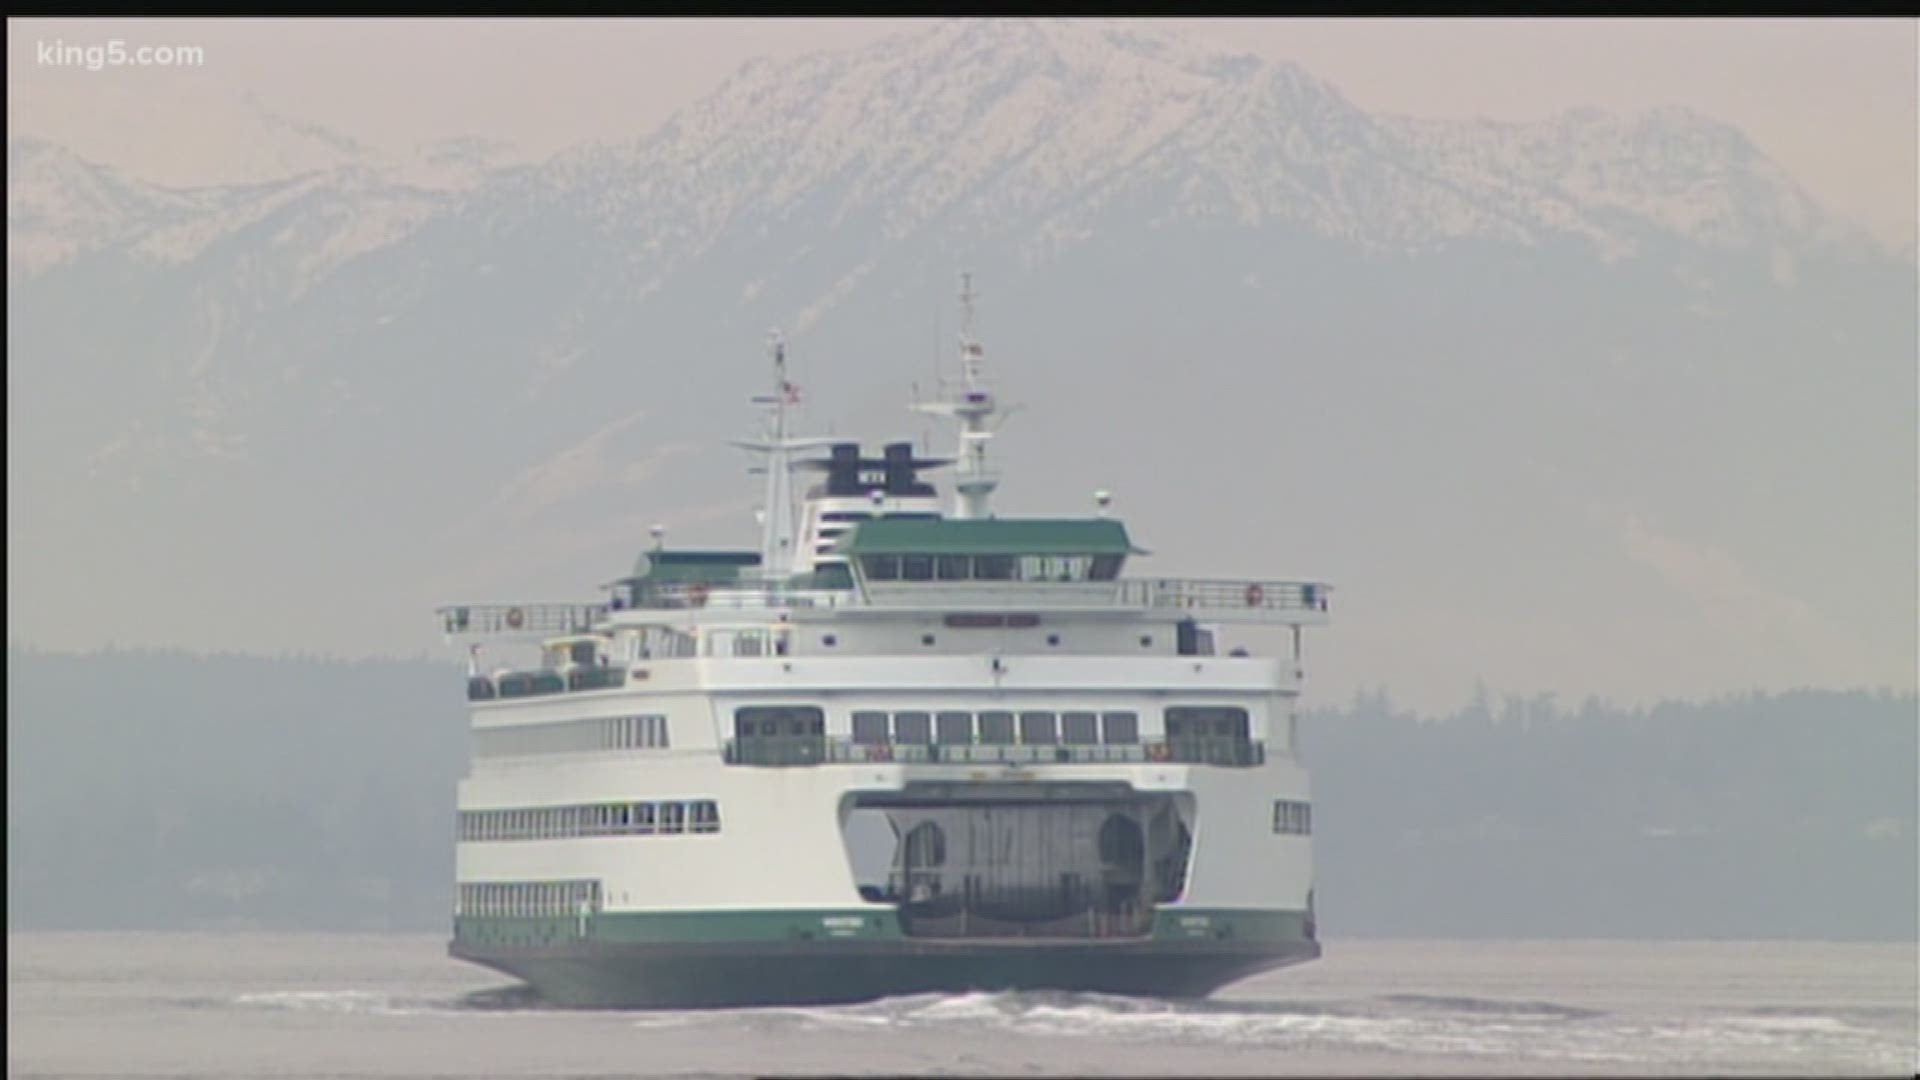 Washington State Ferries is now operating on its spring sailing schedule.